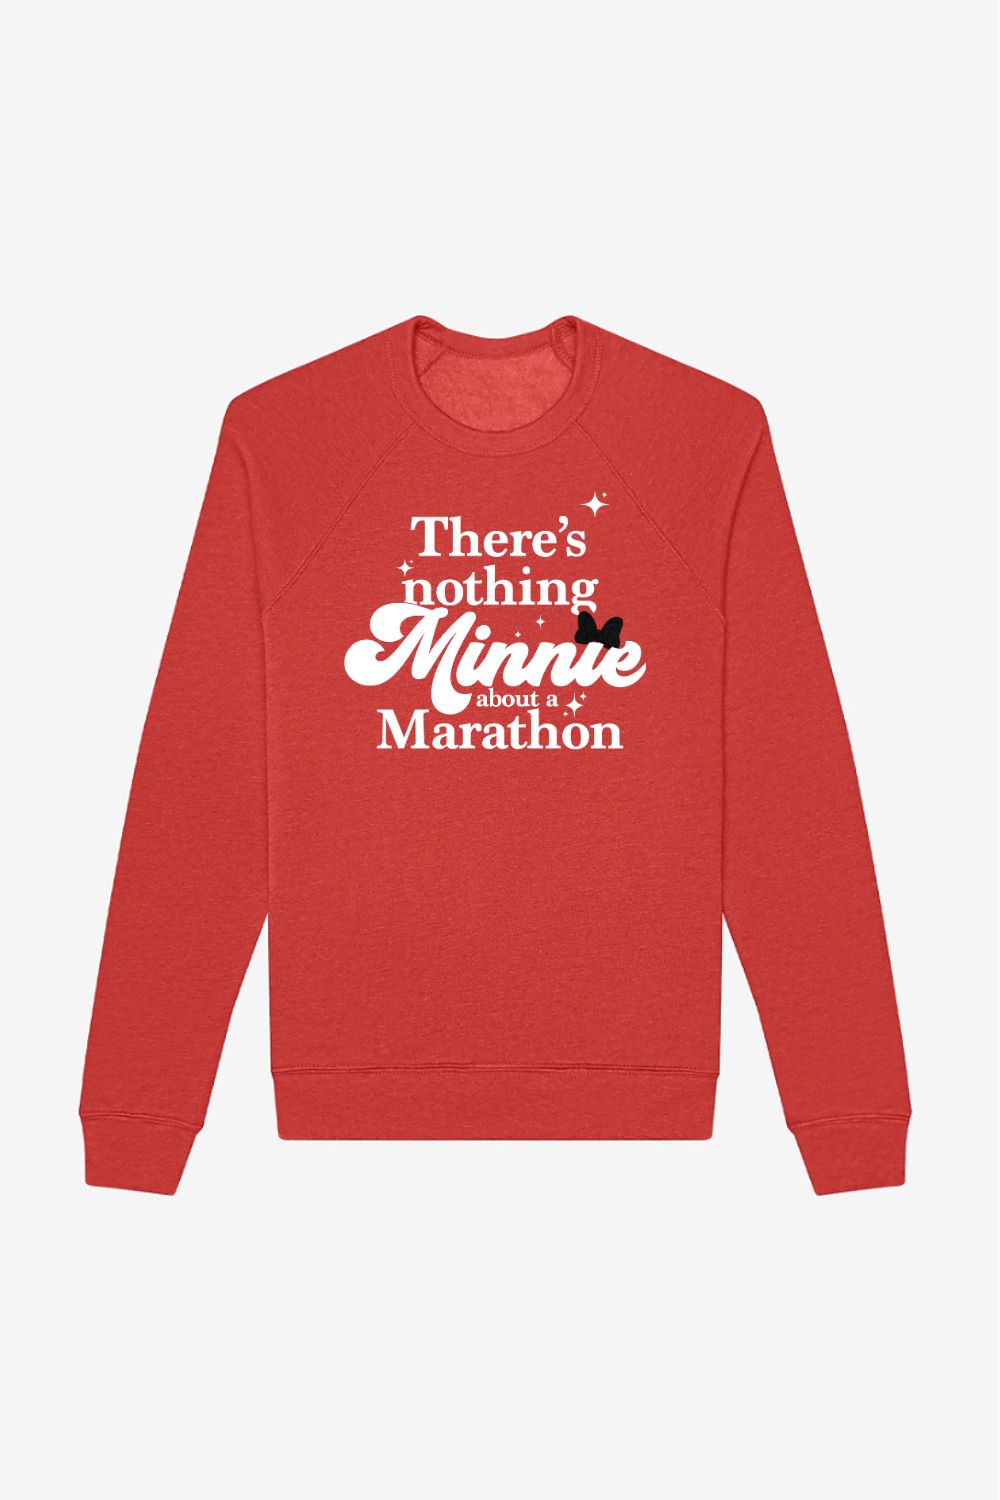 There's Nothing Minnie About a Marathon Sweatshirt